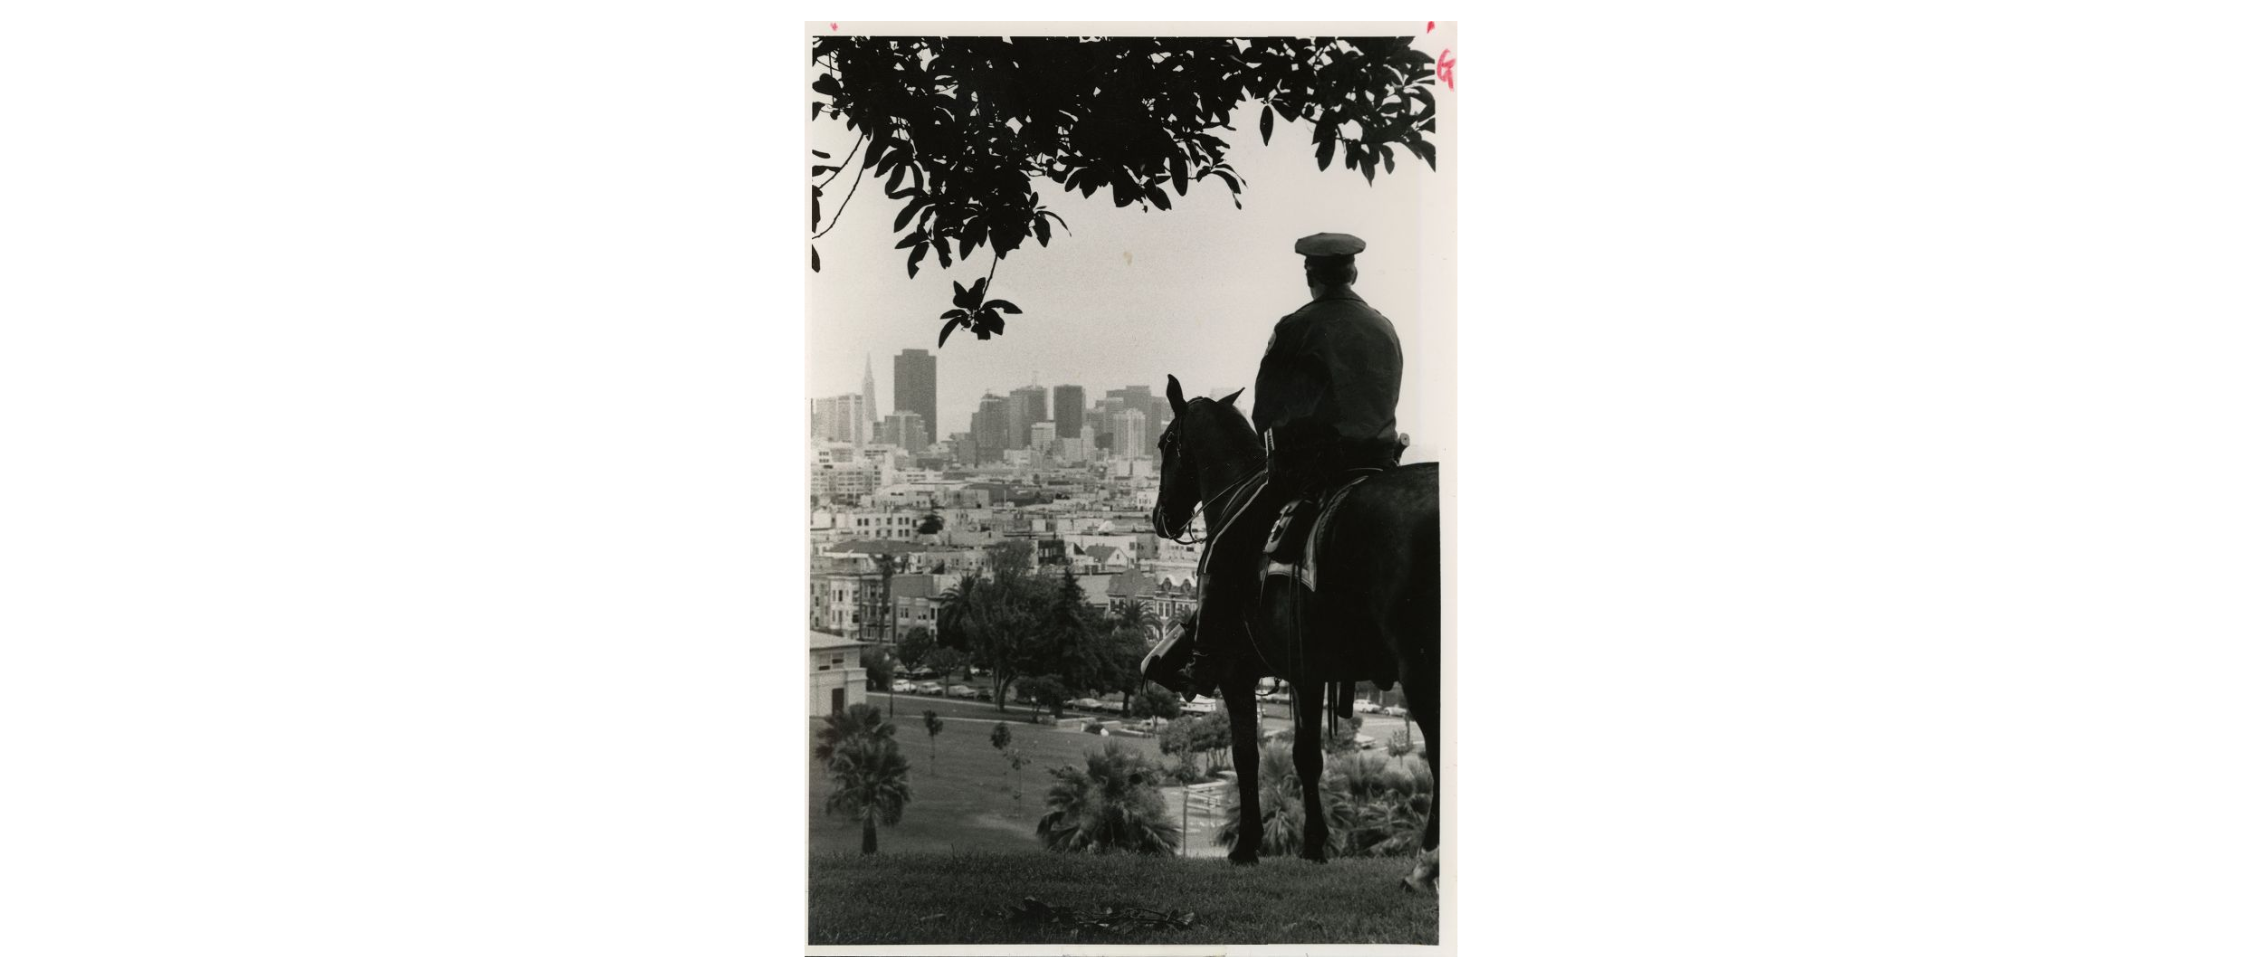 Mounted officer in profile looks out over San Francisco from a hill.